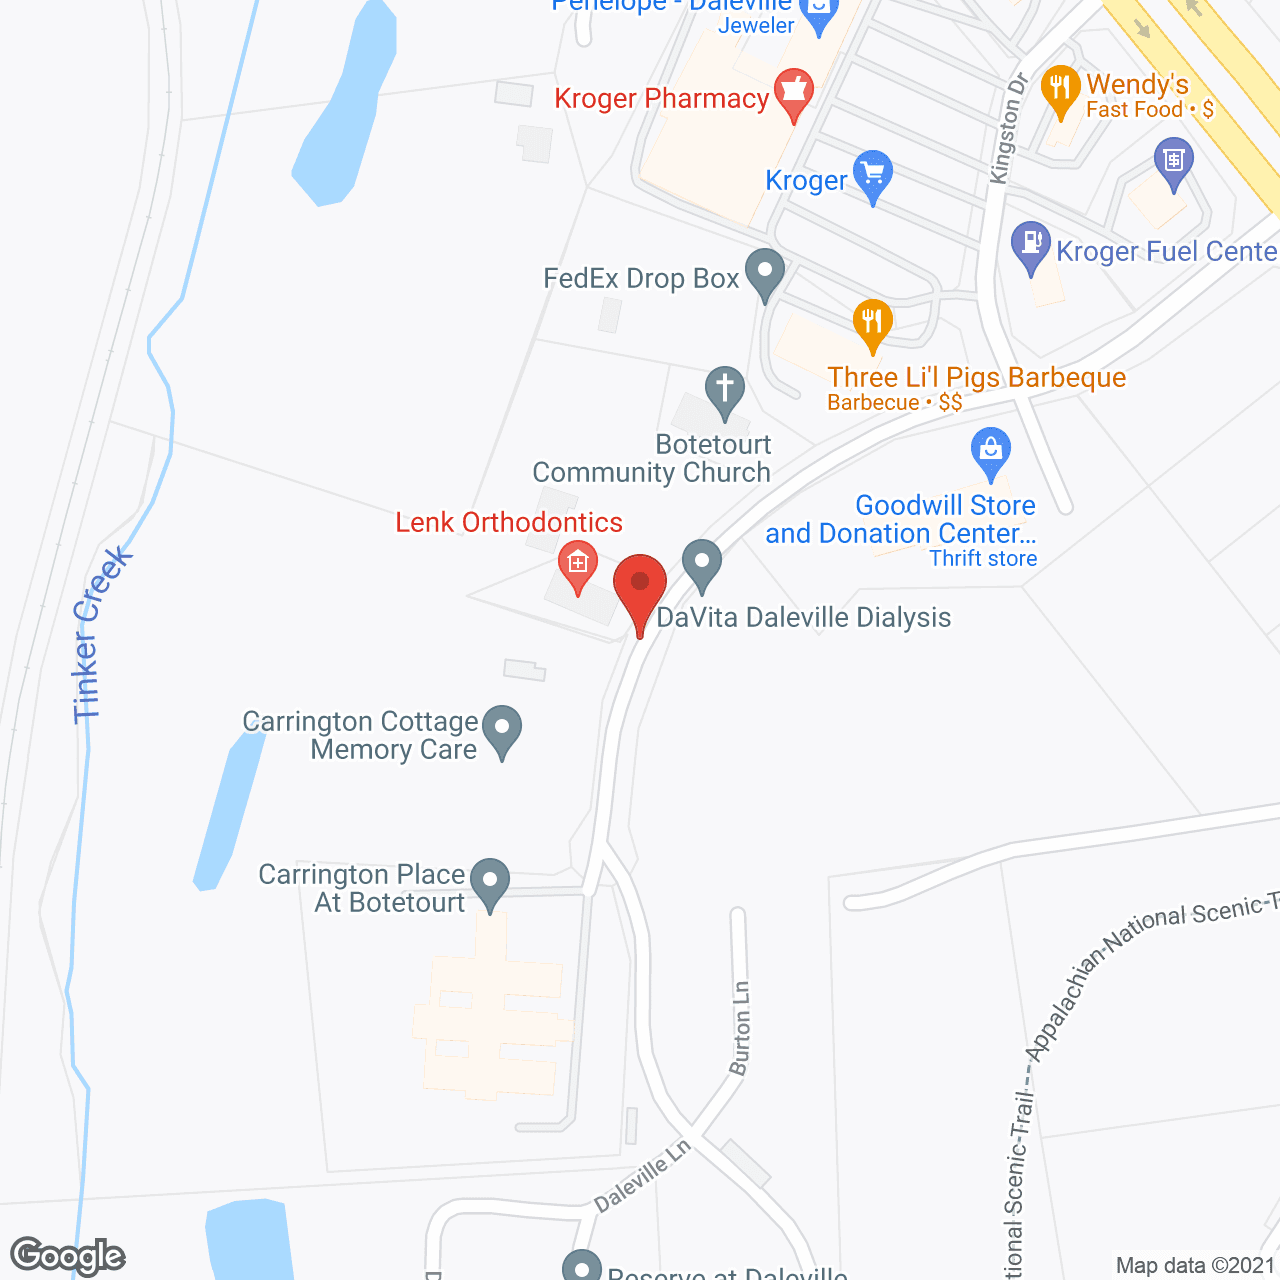 Carrington Cottage Memory Care Center in google map